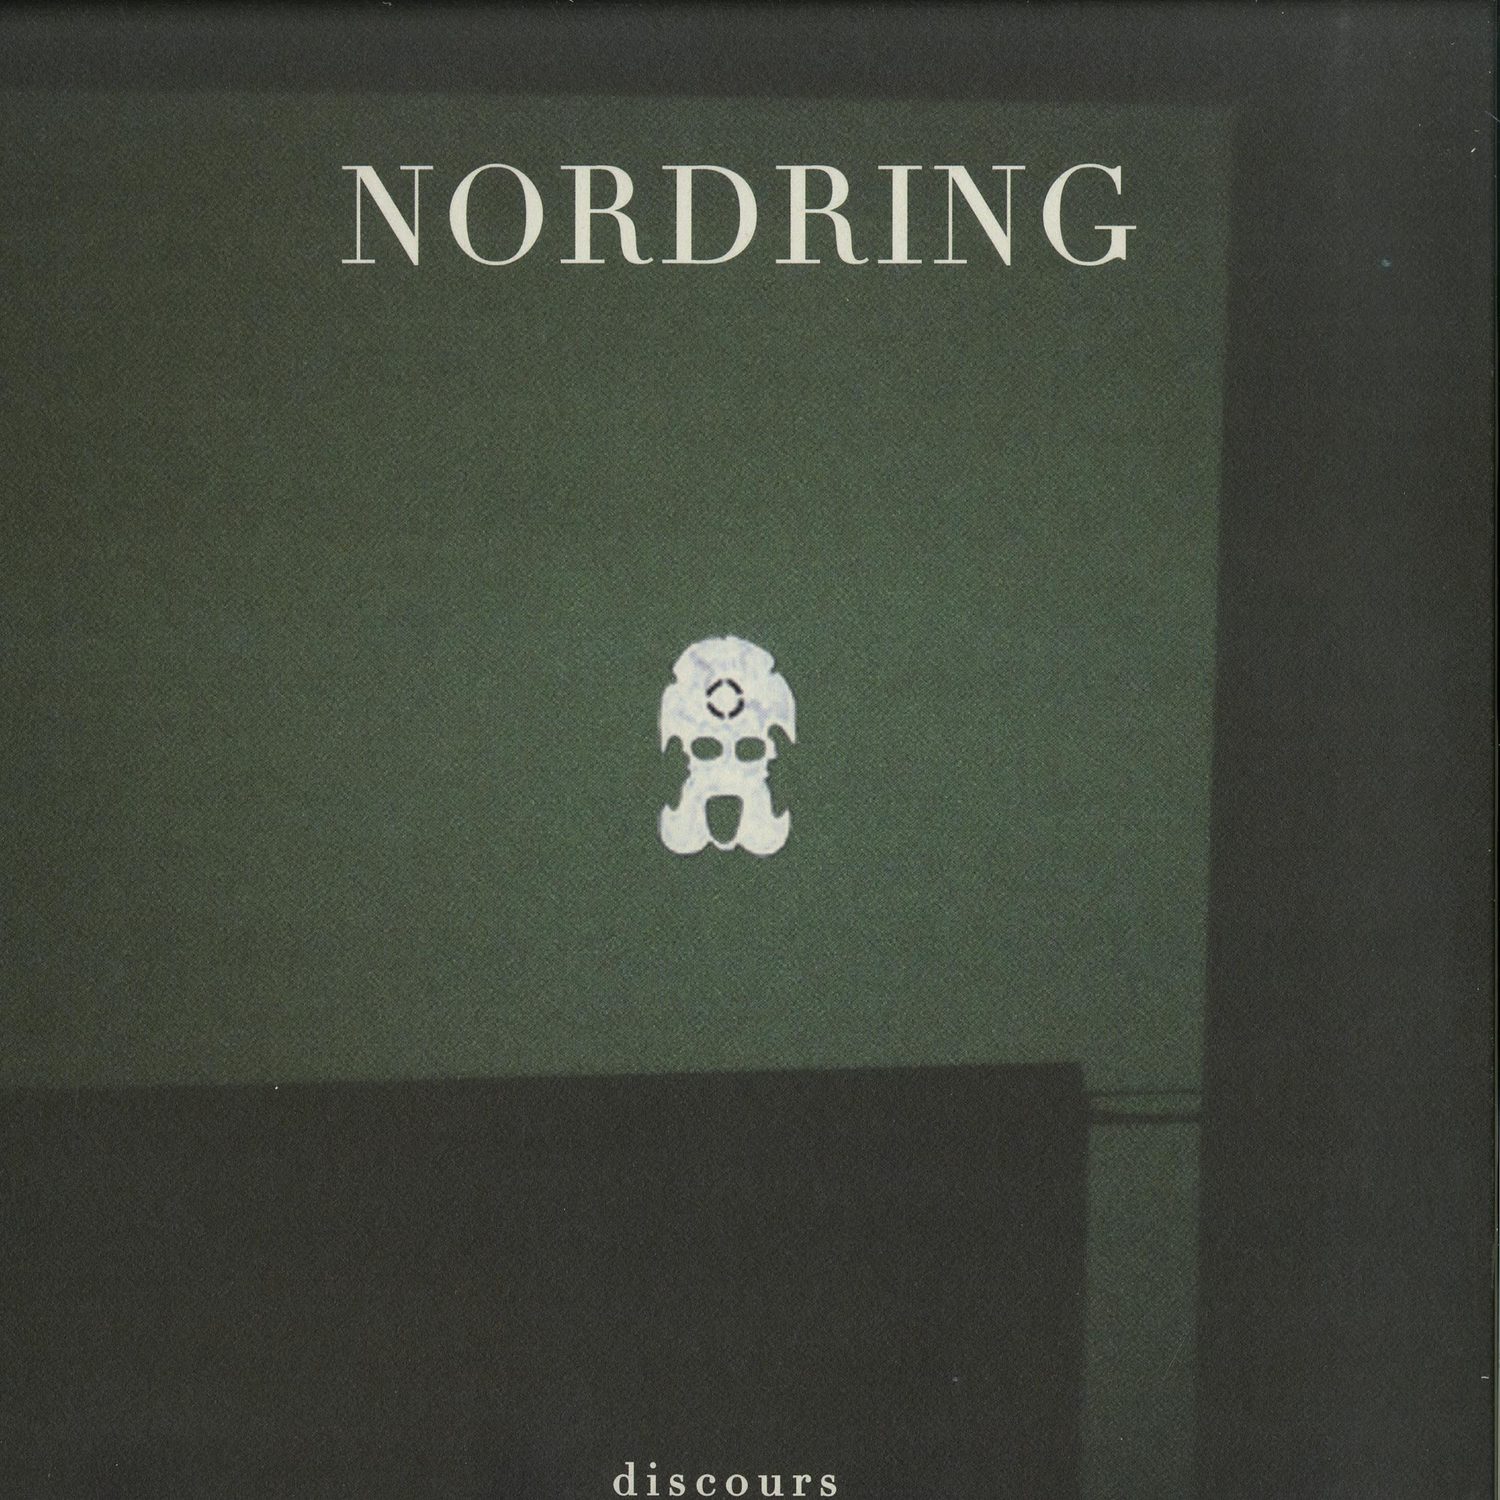 Jacob Cheneux & Martyne - NORDRING 